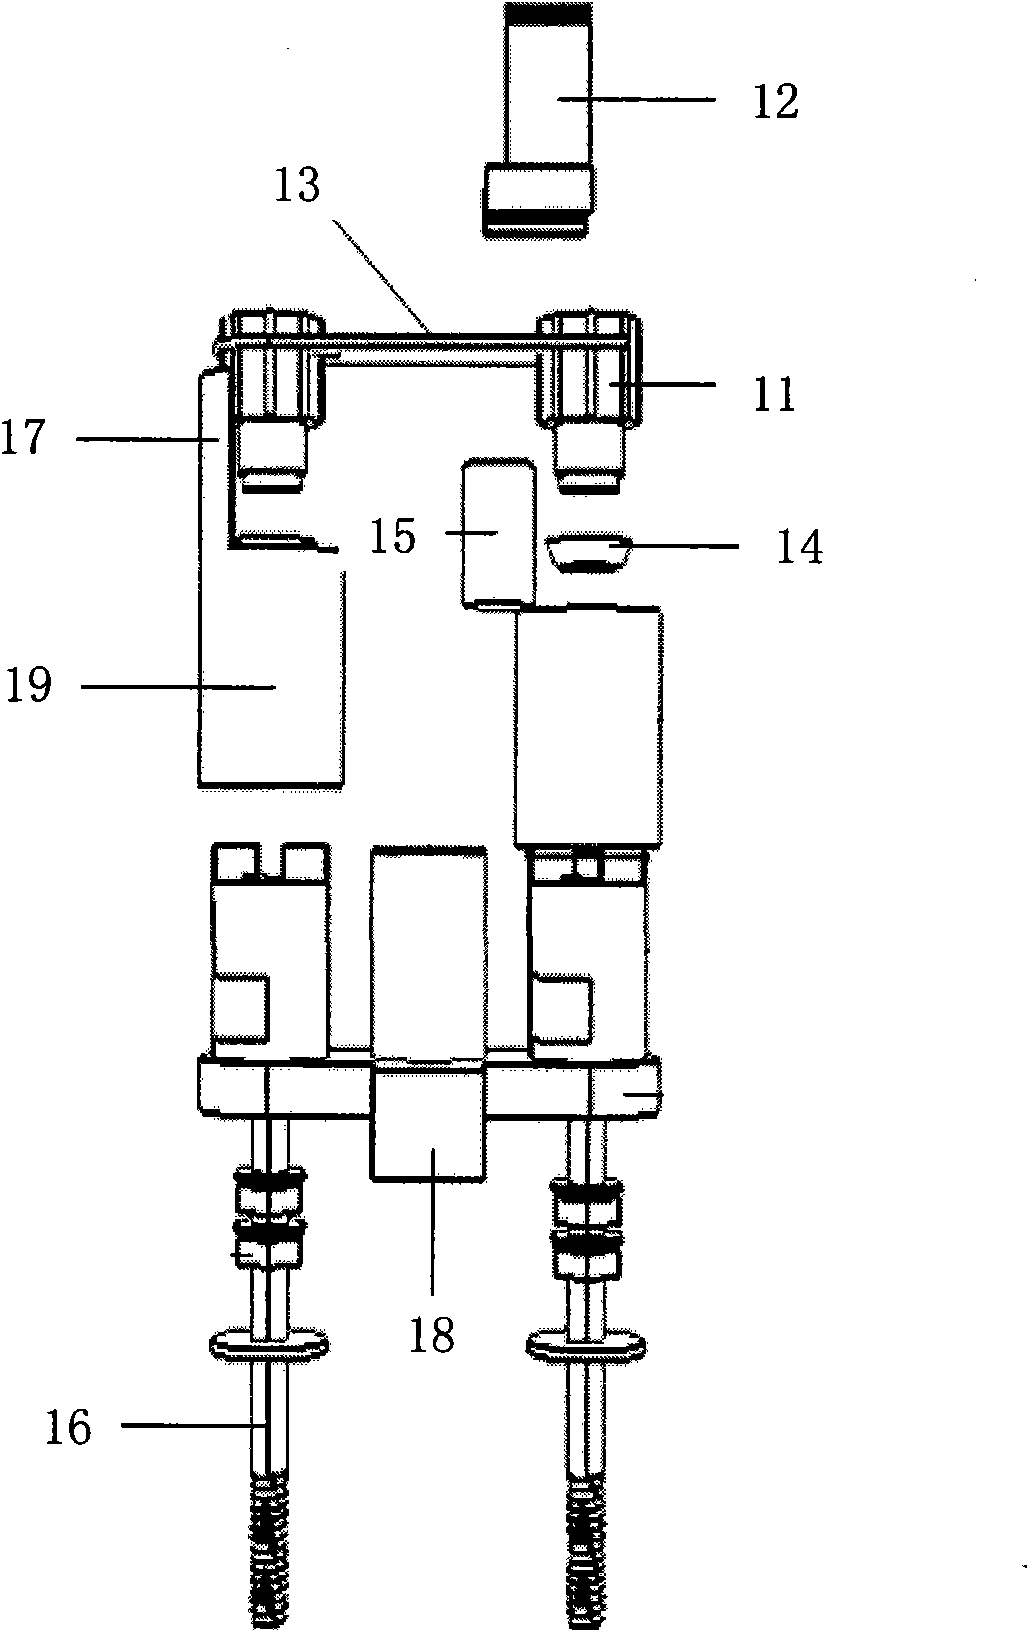 Intelligent detection system and detection method of press plate position